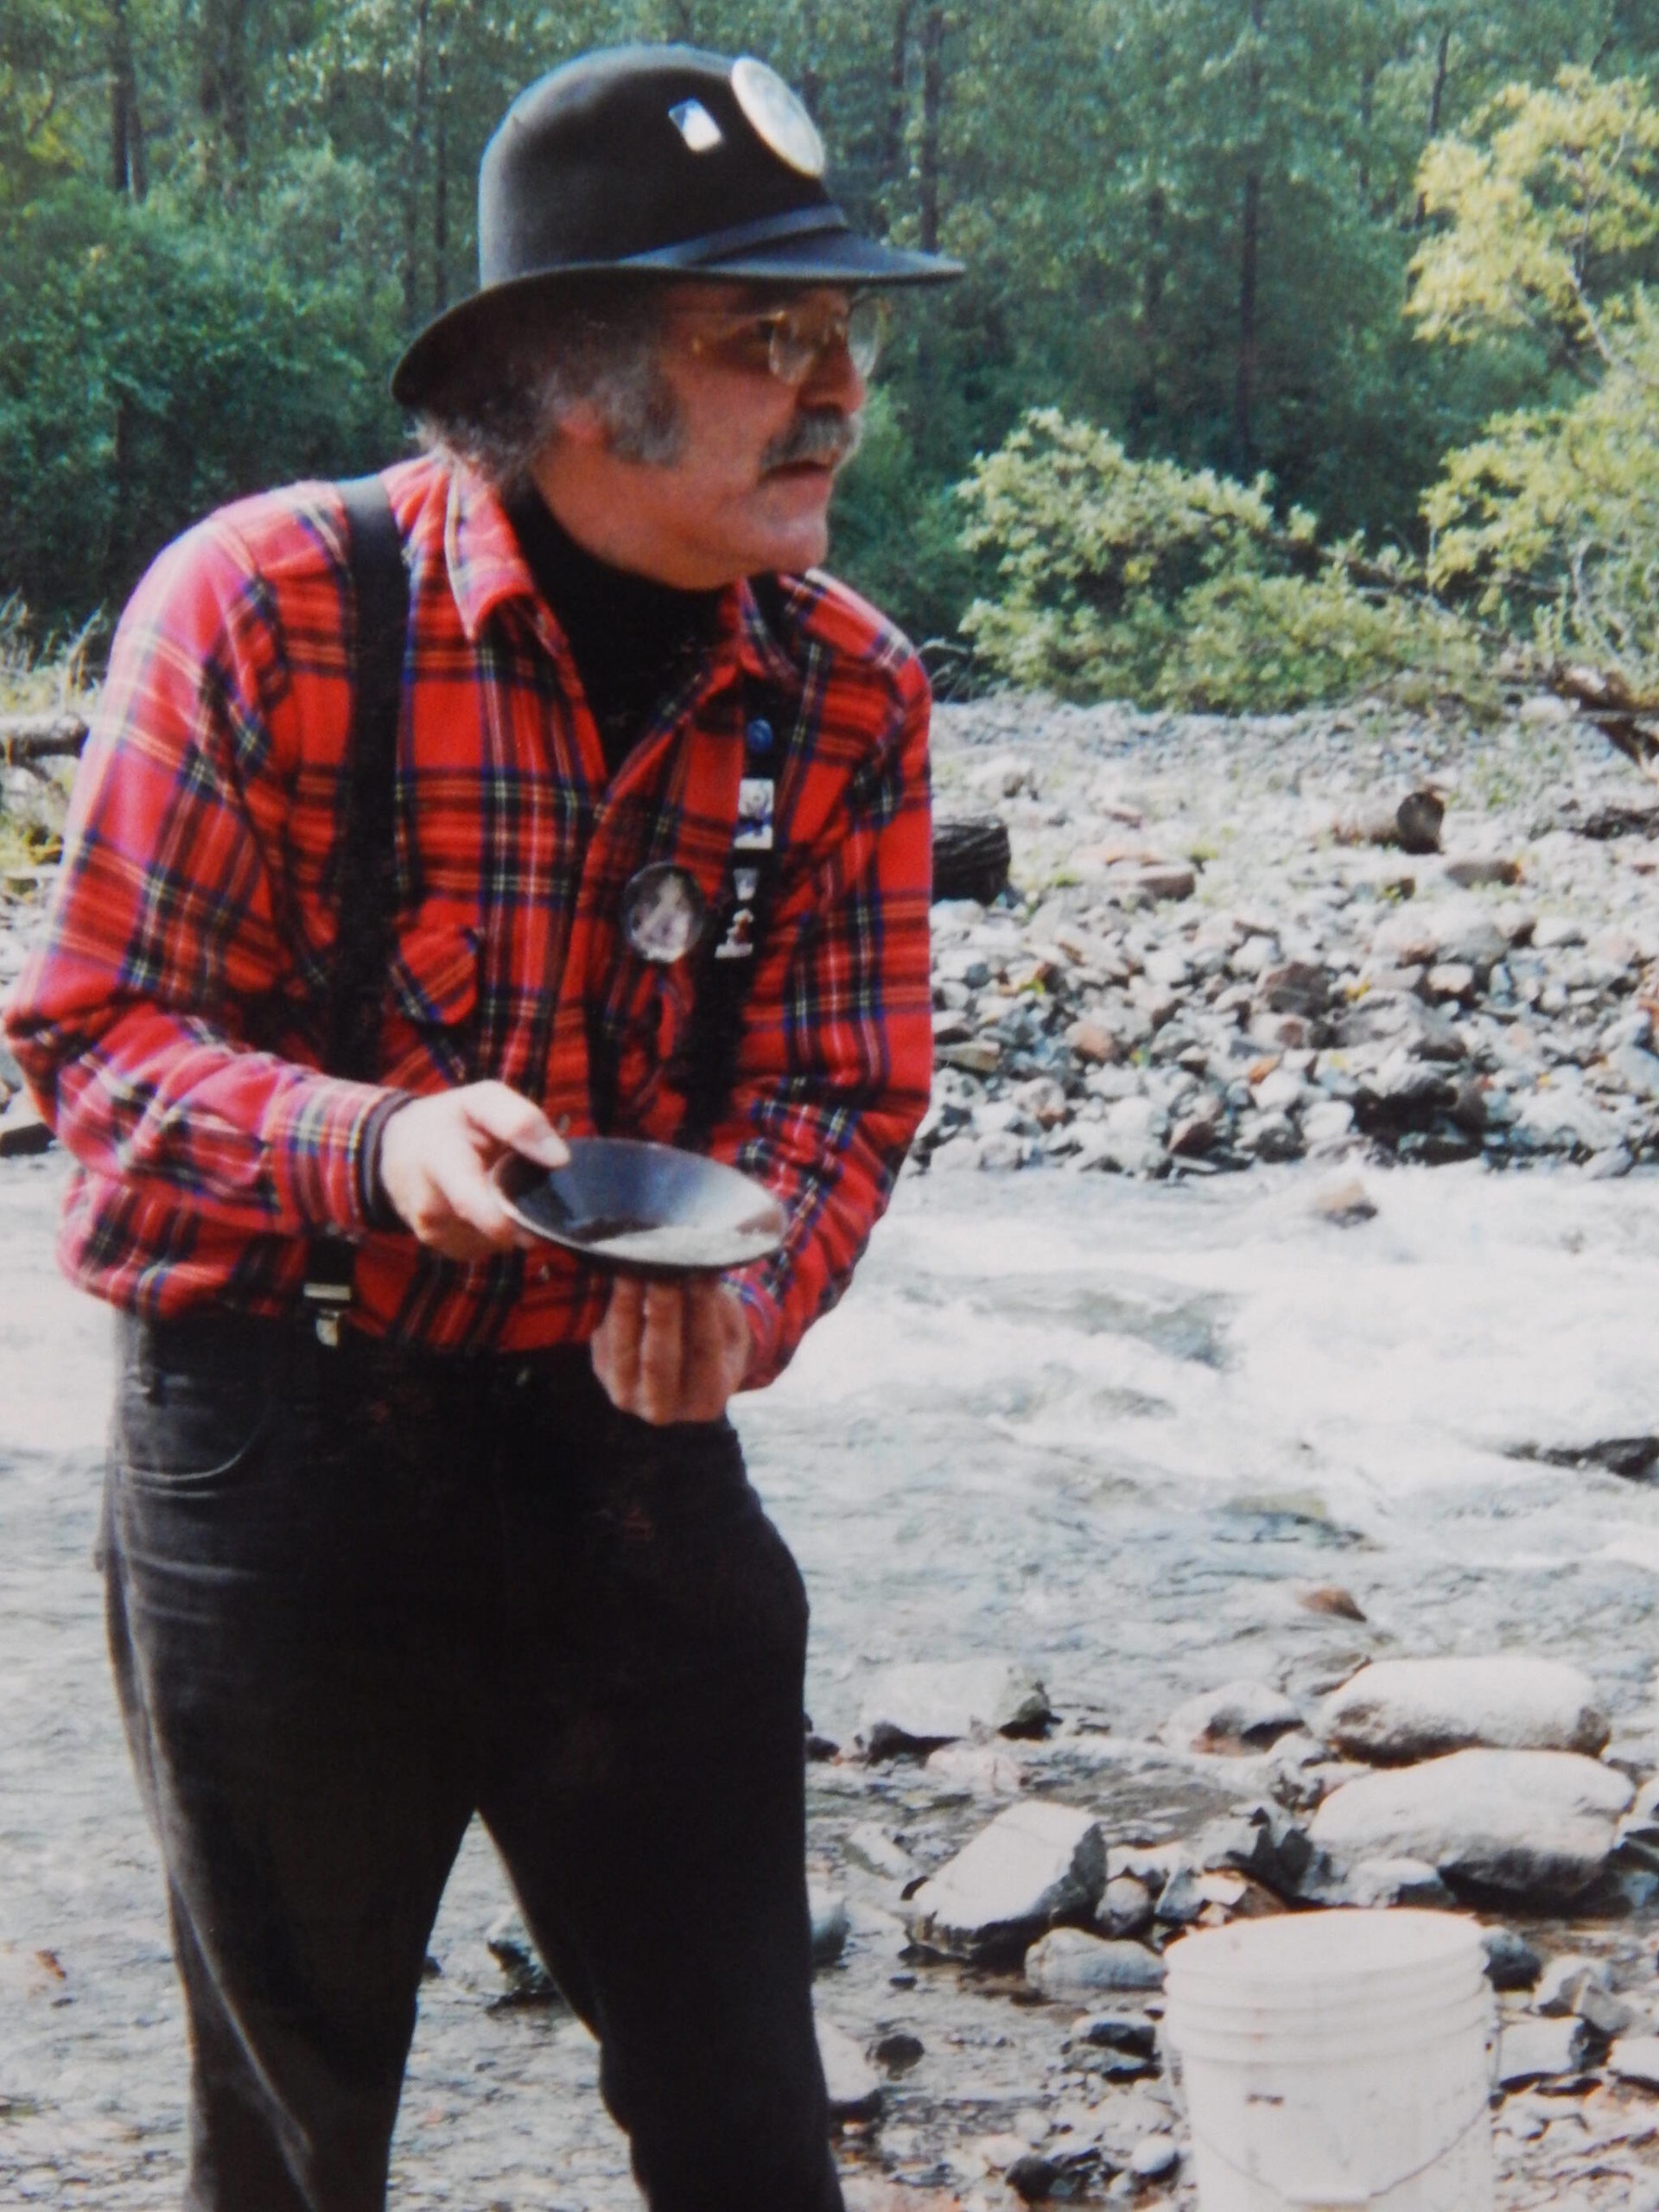 Courtesy Photo / Jonathon Turlove 
Michael Orelove teaches gold panning in Juneau. Orelove was crowned the Alaska State Gold Panning Champion in 1989, 1994, 1999, 2004 and 2007.